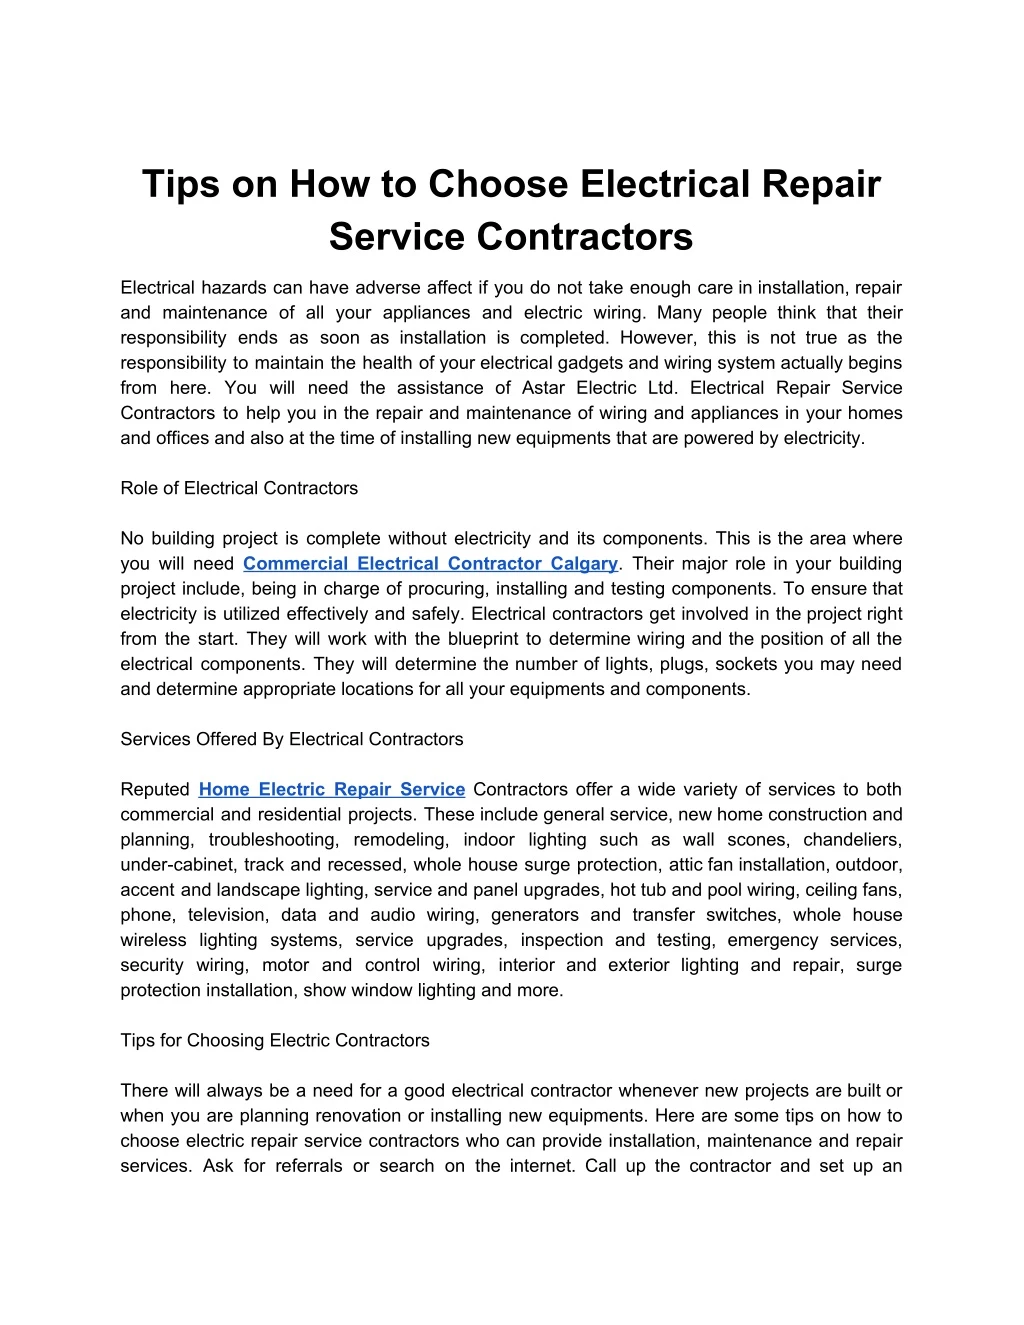 tips on how to choose electrical repair service